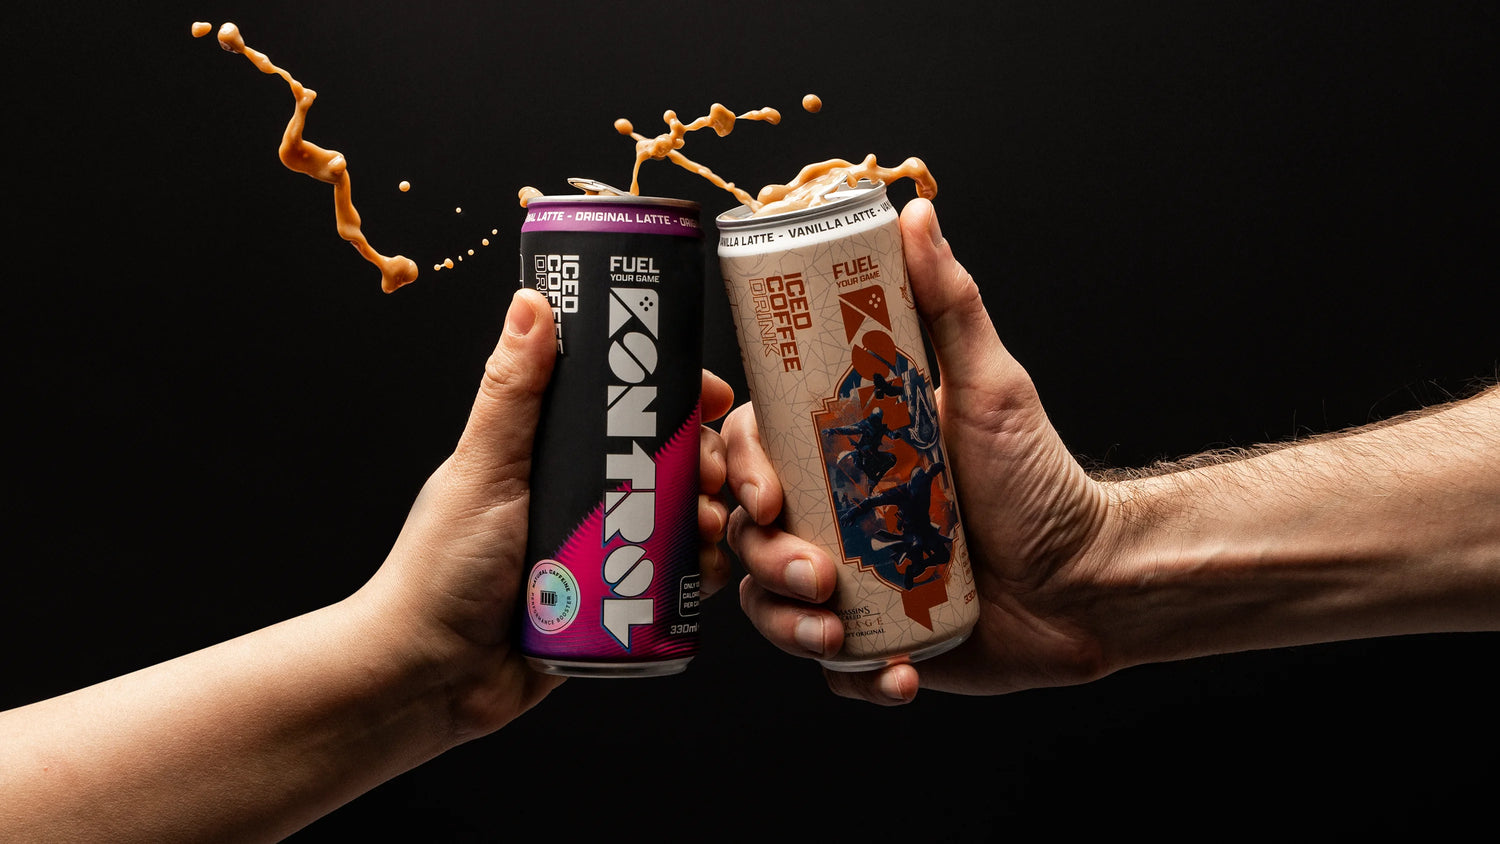 The UK’s Only Iced-Coffee Gaming Brand Launches